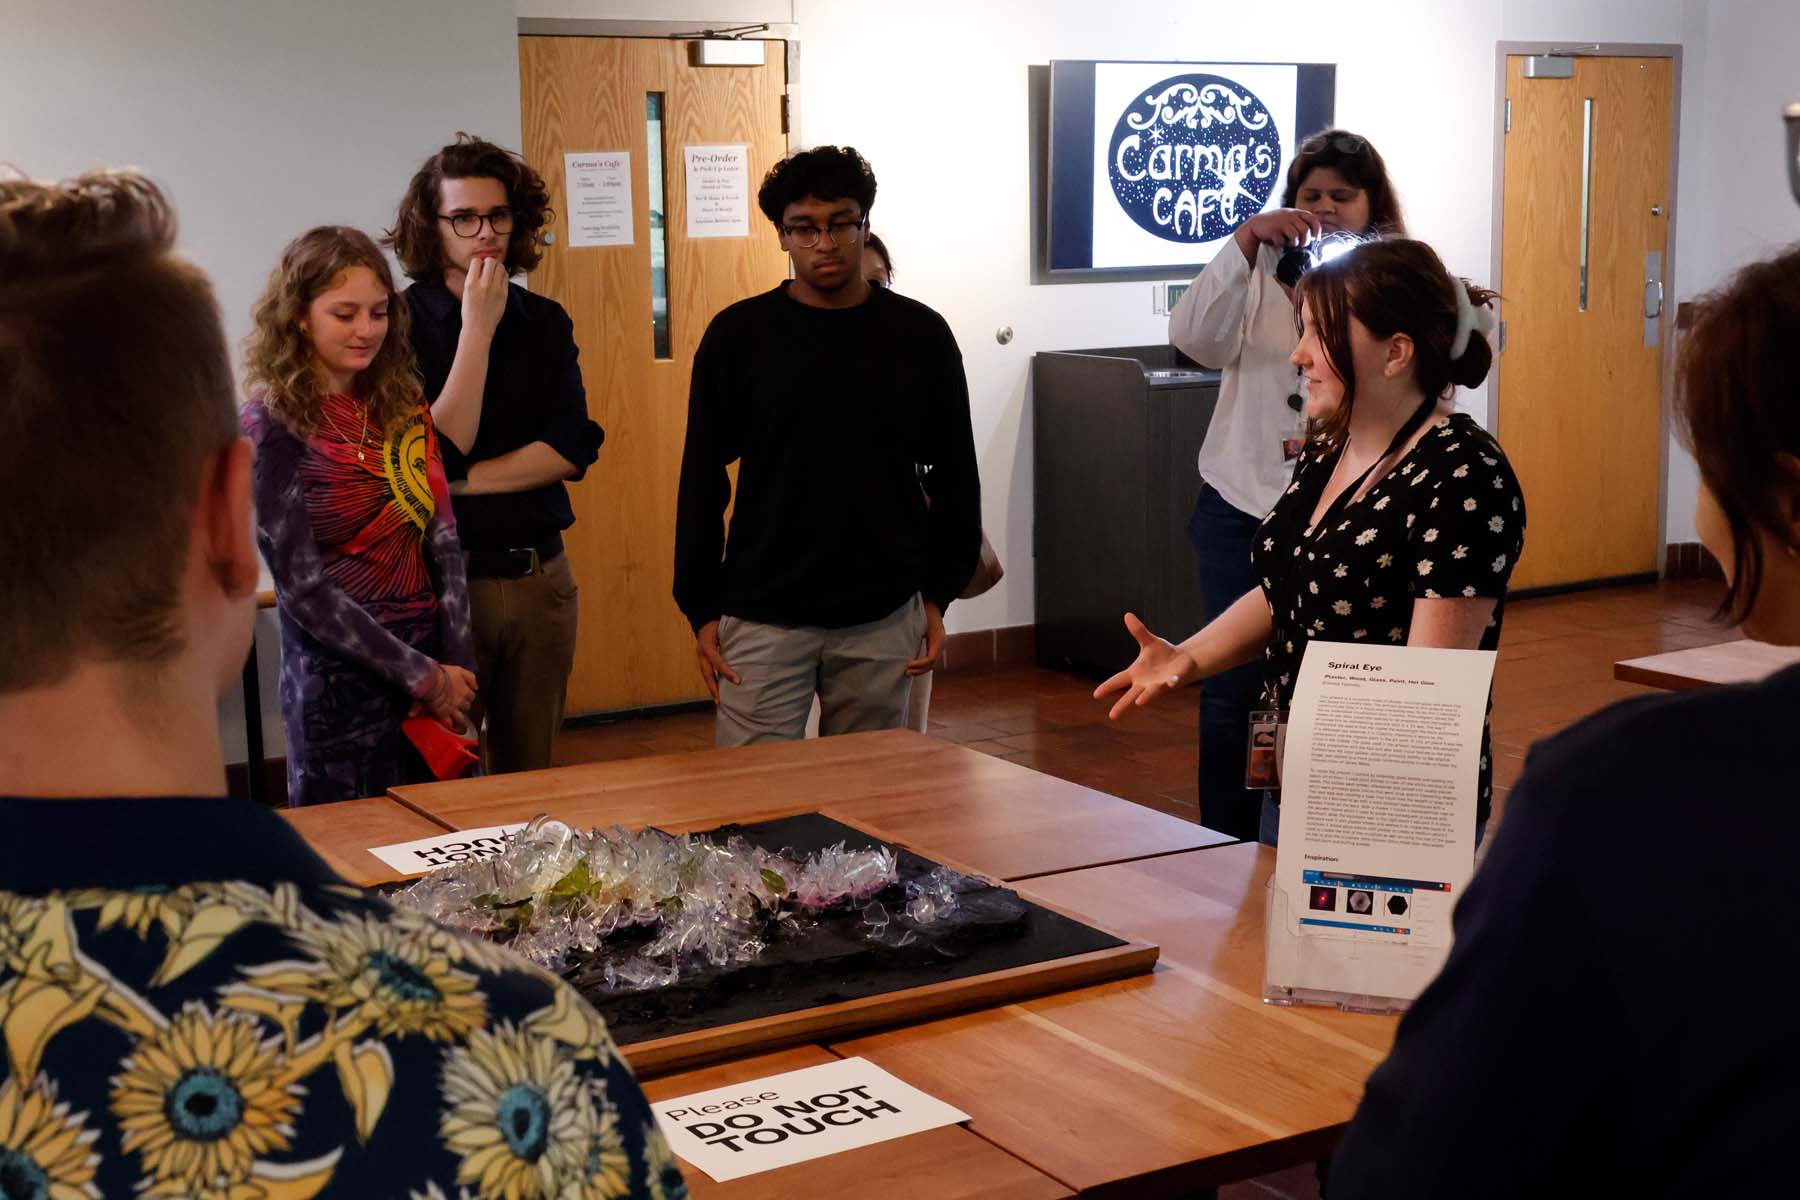 A student motions with her hand as she describes her sculpture to a group of onlookers. The sculpture sits on a table and is made from broken glass pieces formed into the shape of a spiral galaxy.